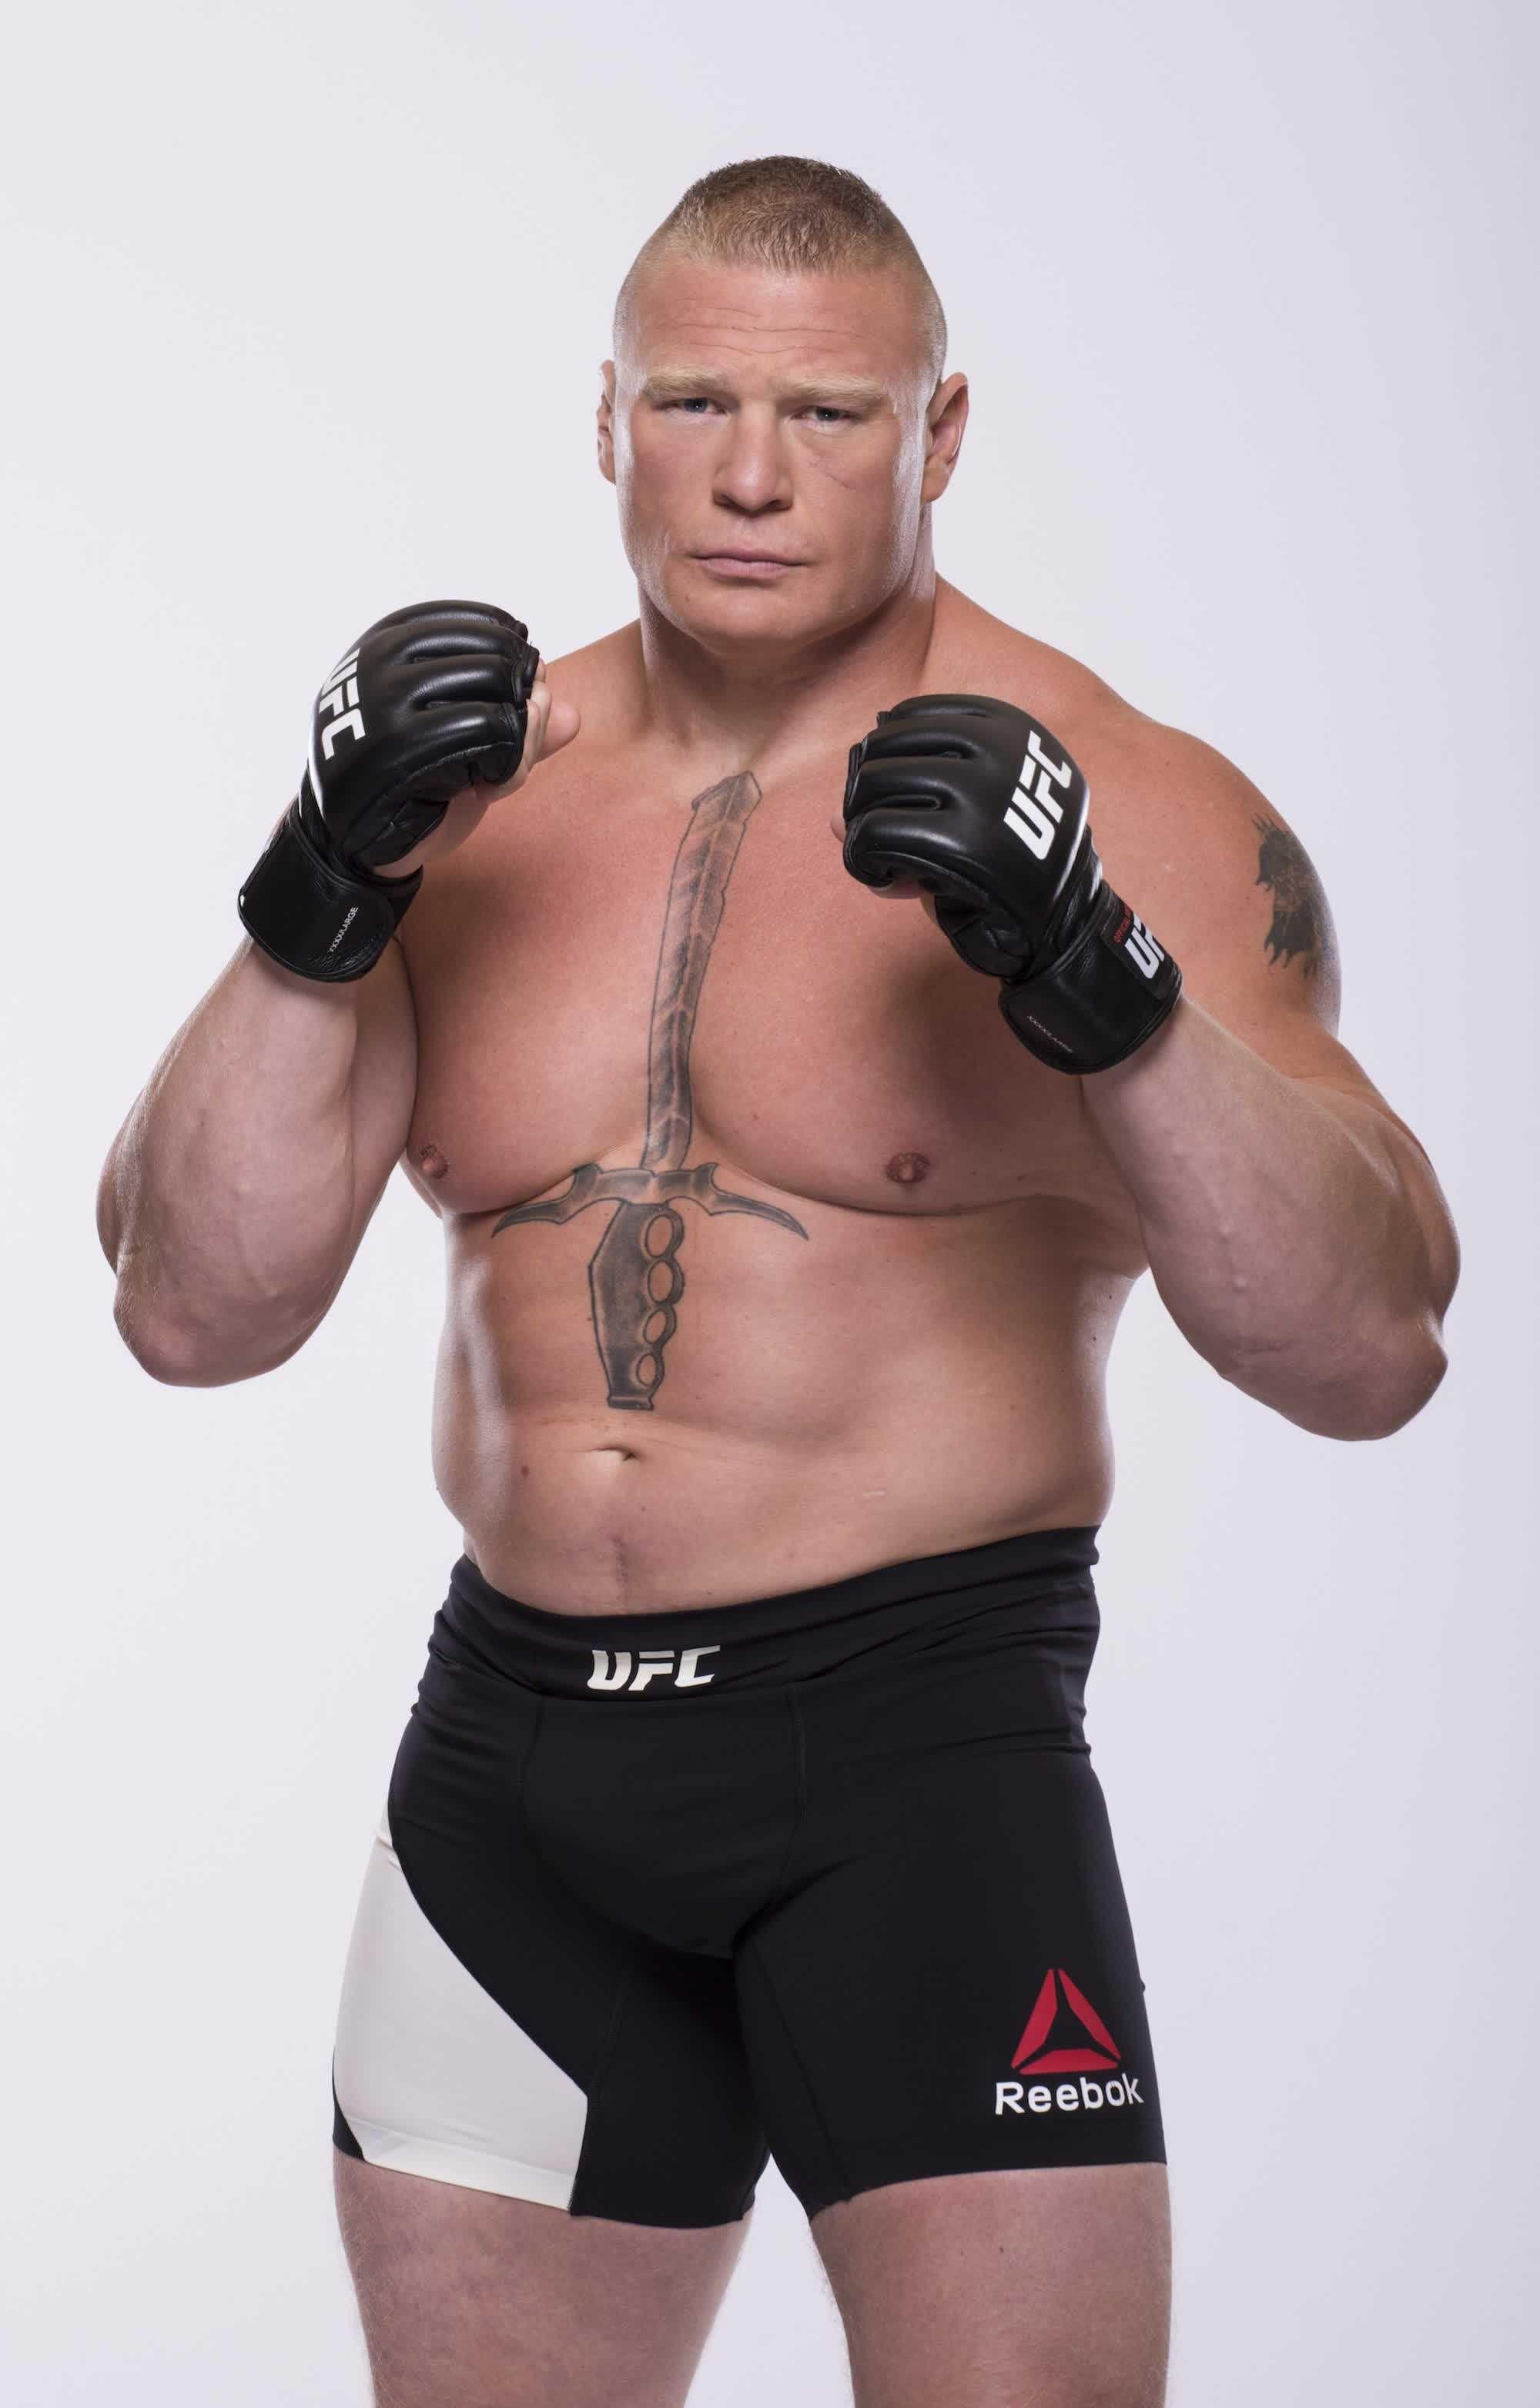 Picture Of Brock Lesnar High Resolution Full HD Bio Age Height